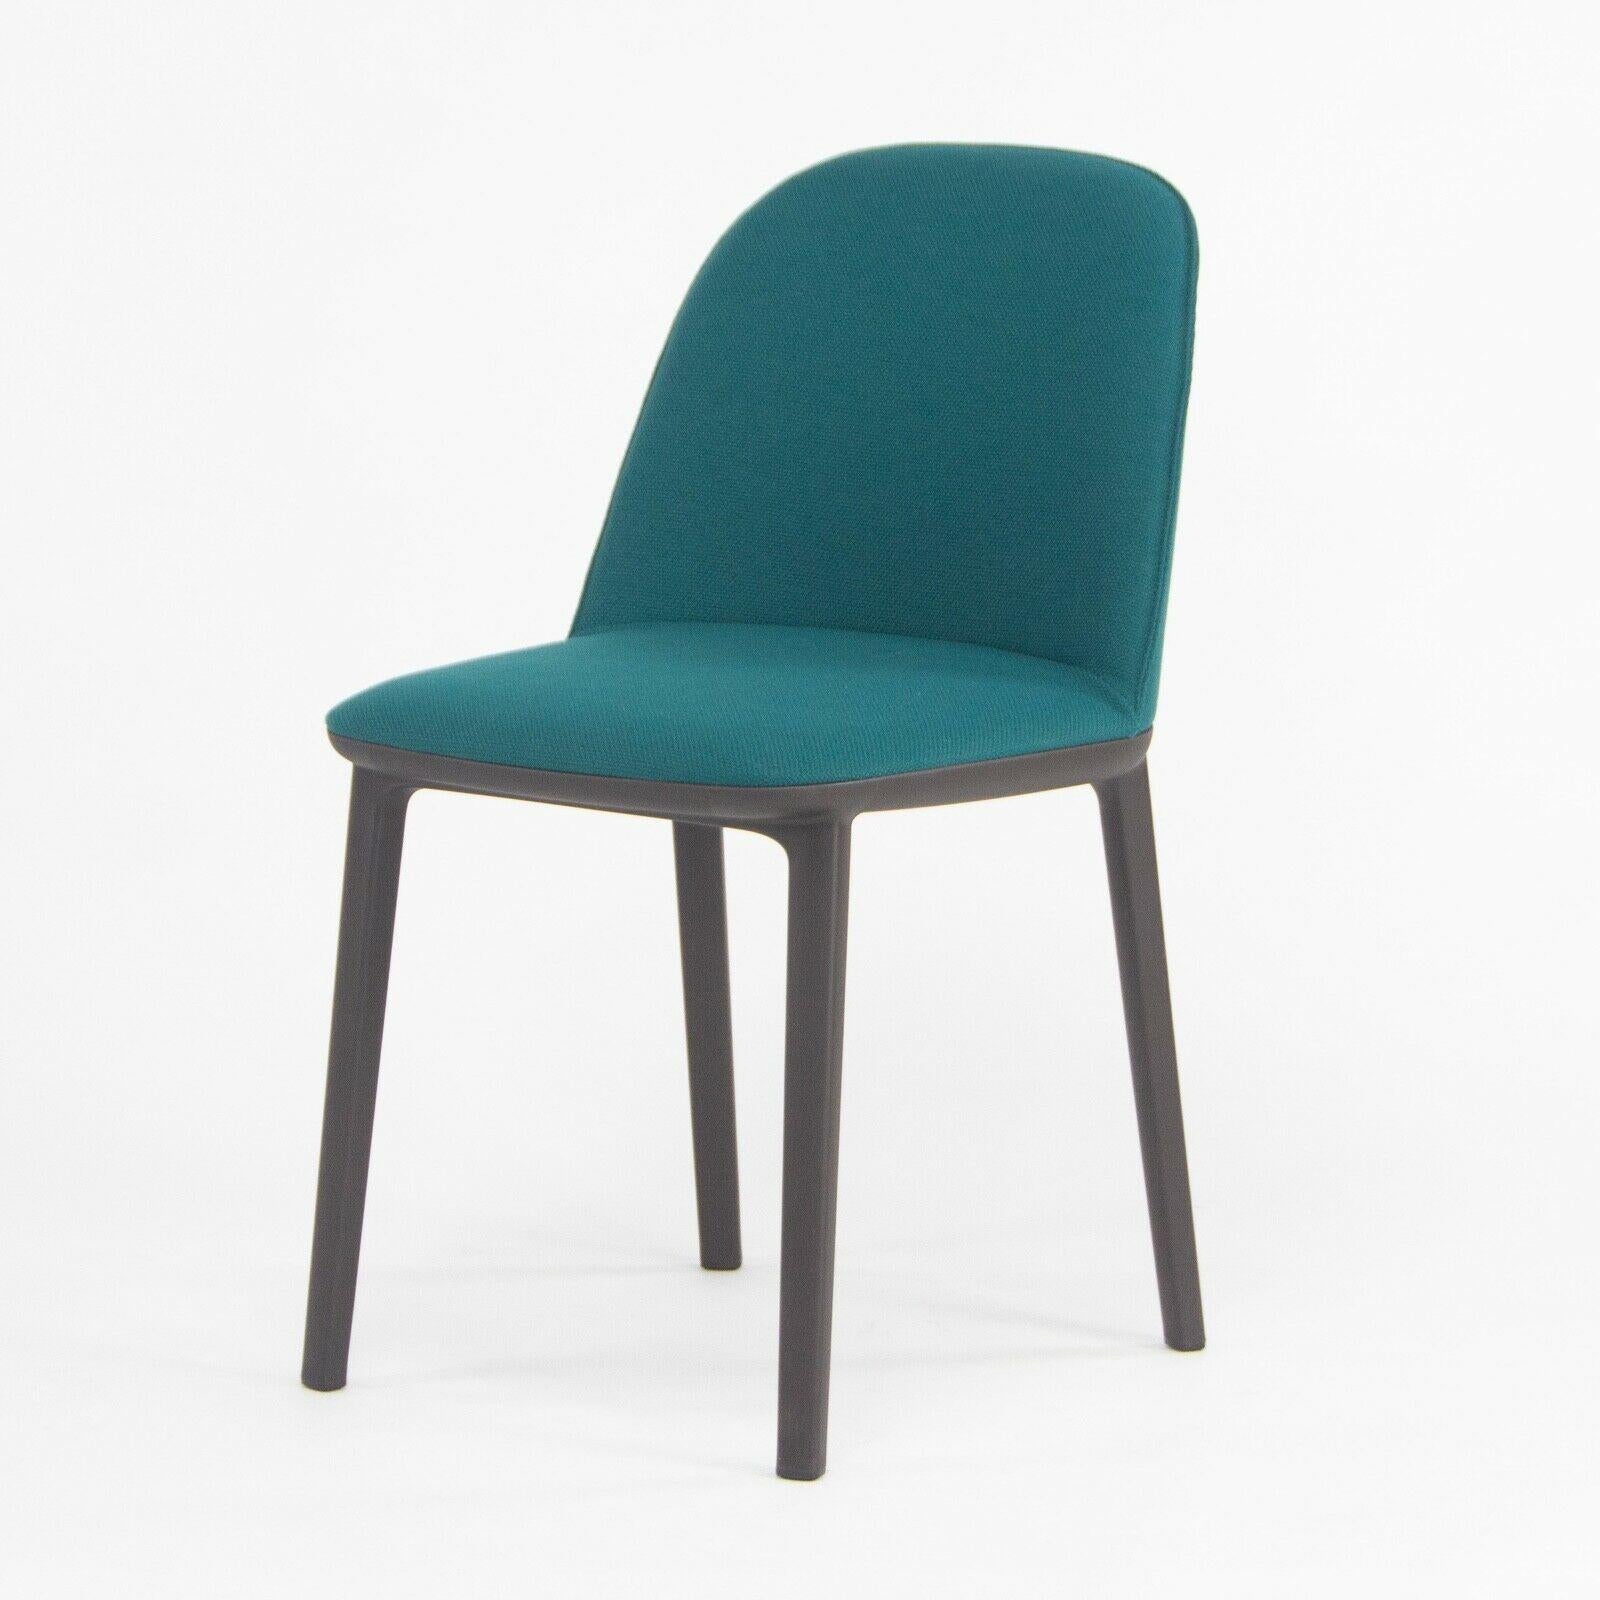 Modern 2019 Vitra Softshell Side Chair w/ Teal Blue Fabric by Ronan & Erwan Bouroullec For Sale